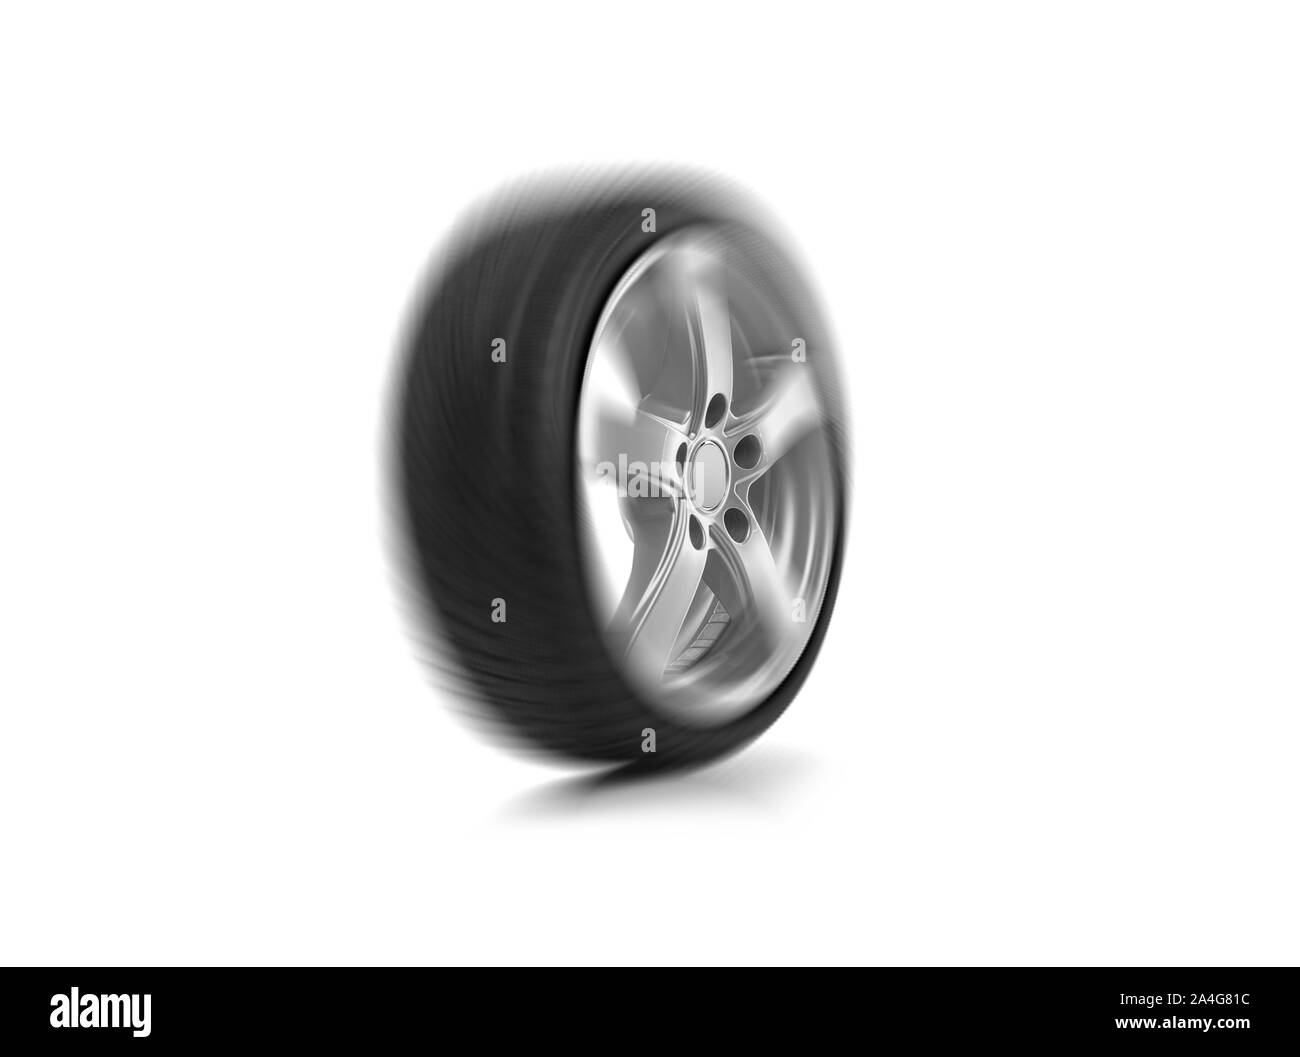 Spinning car wheel on a white background. Stock Photo